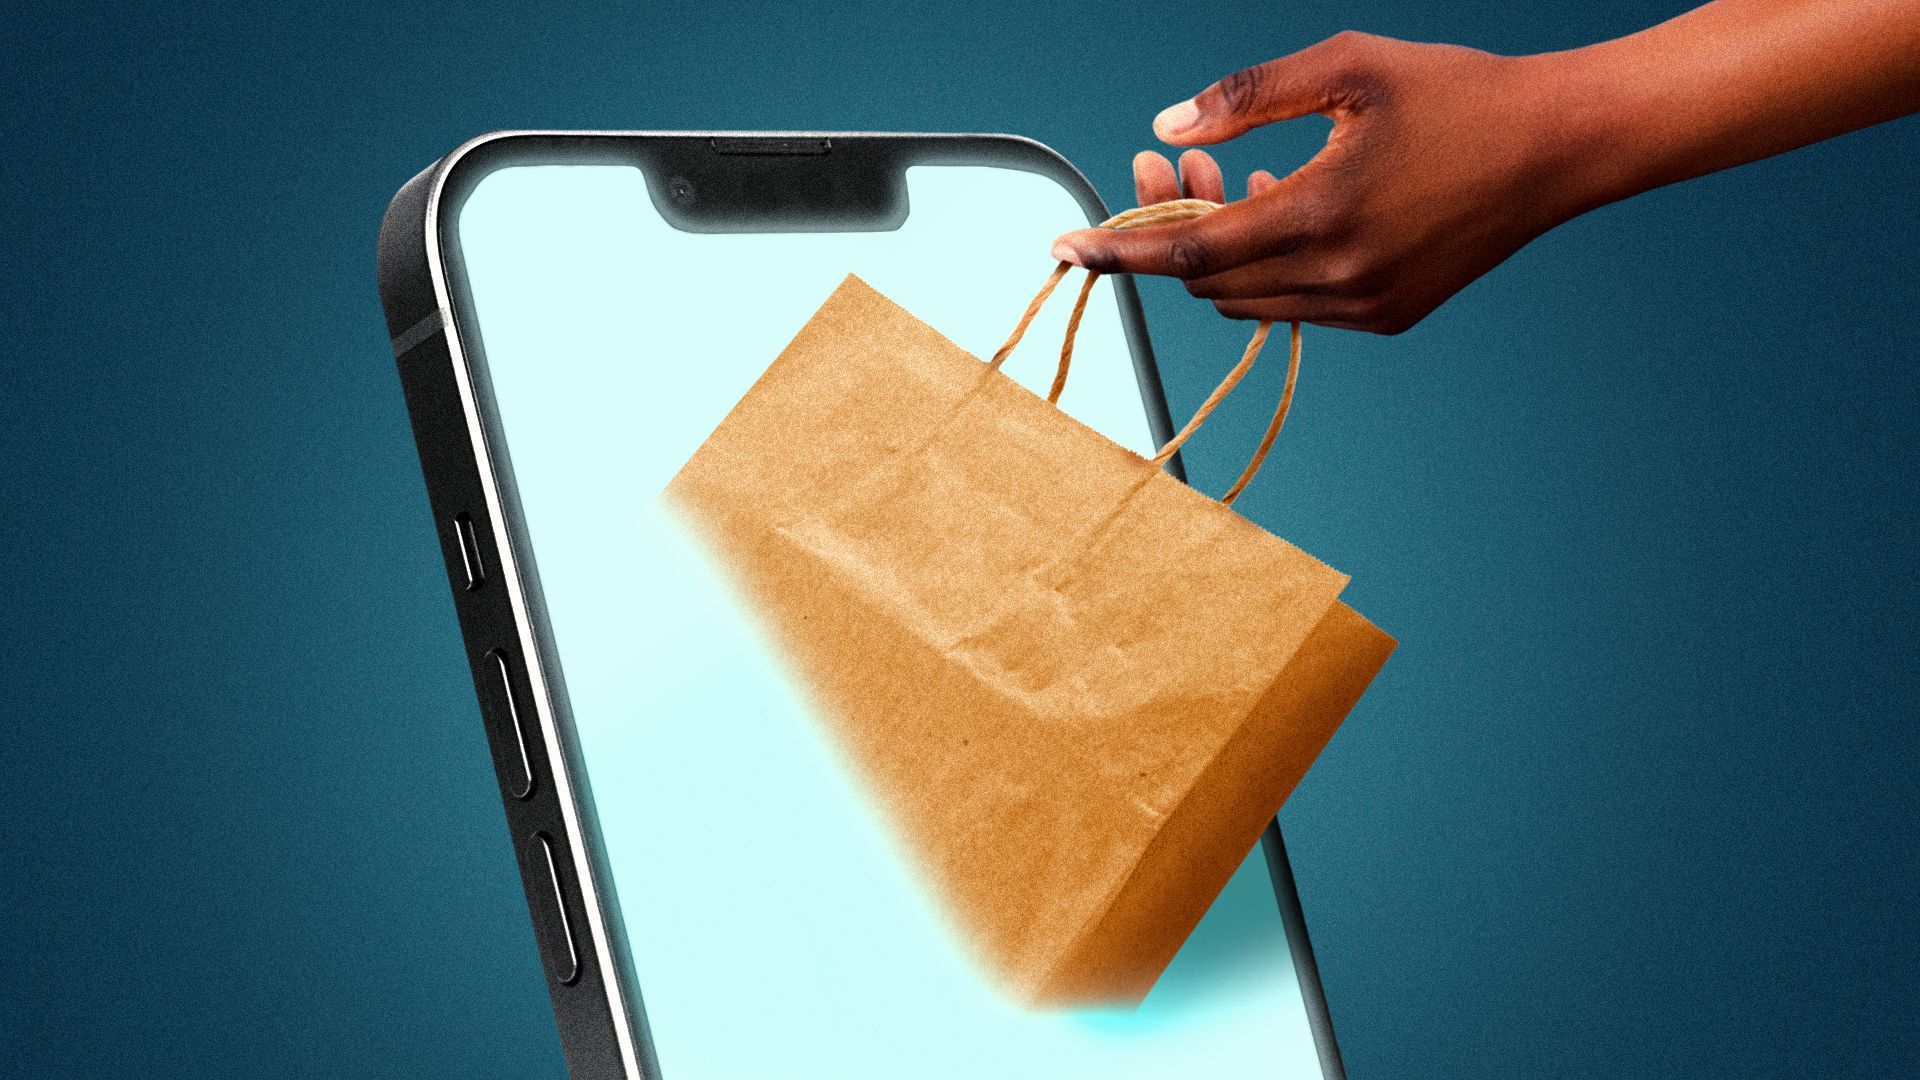 Illustration of a hand pulling a shopping bag out of a phone screen.